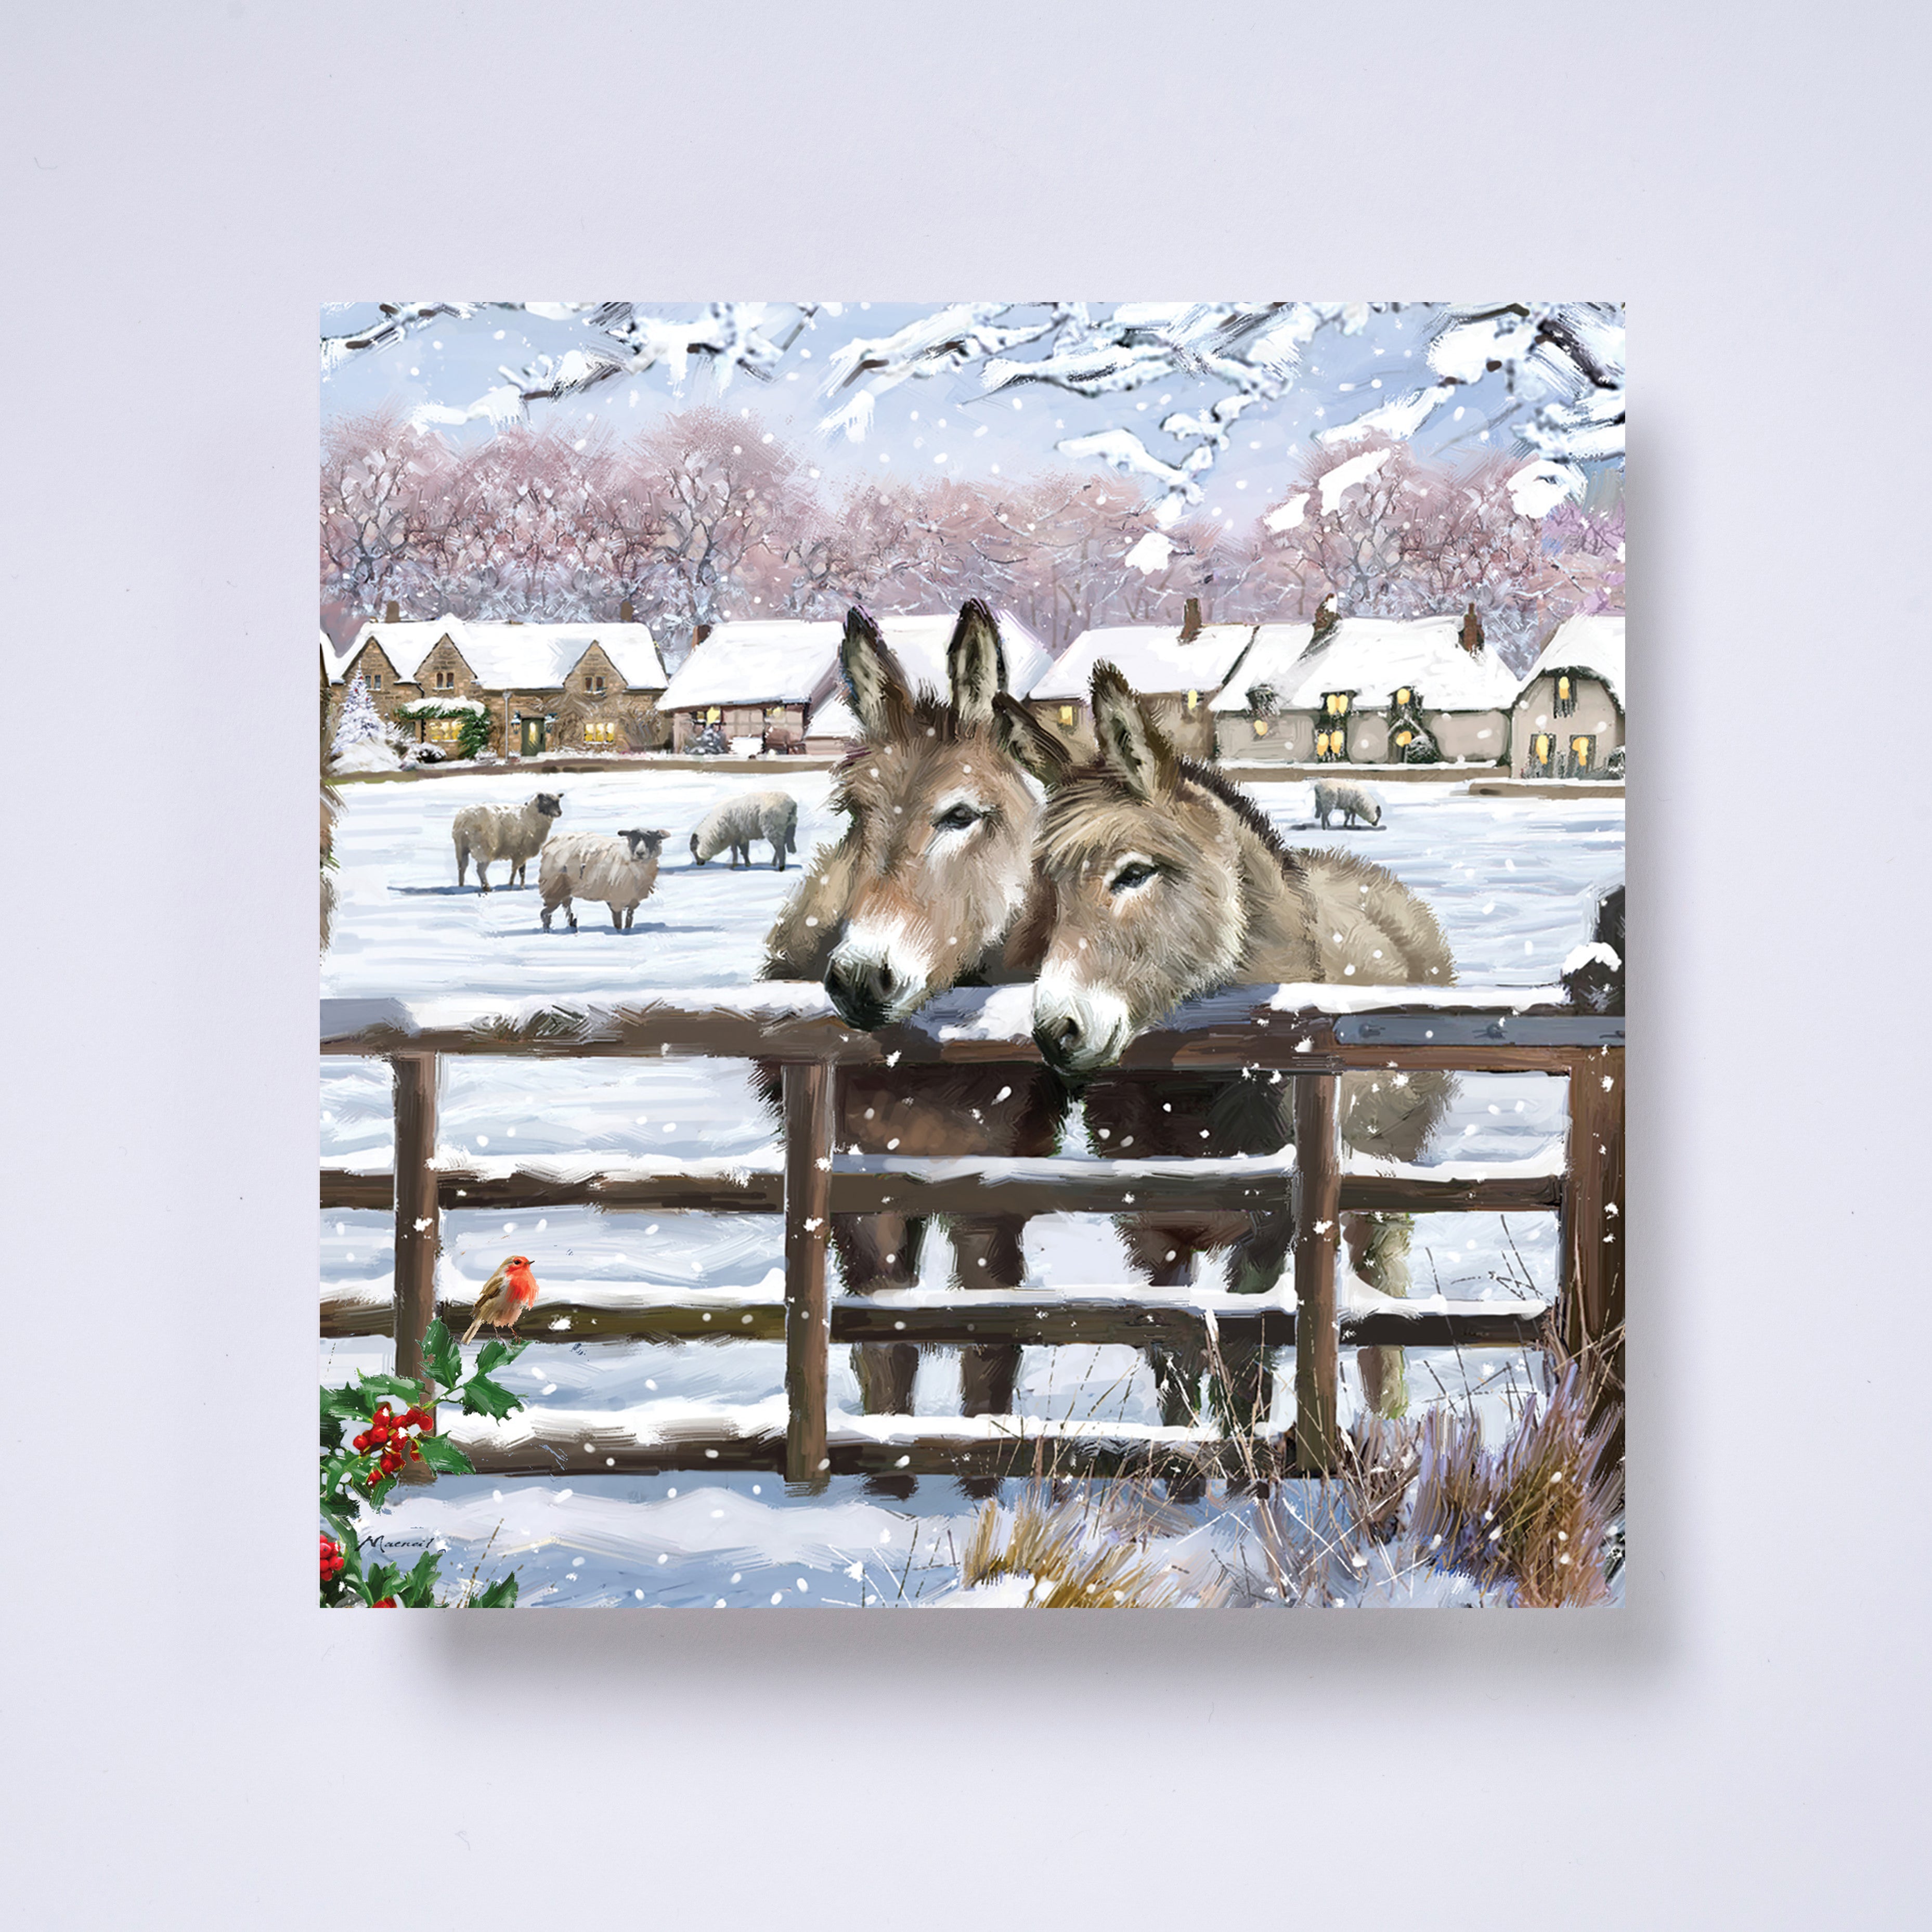 Donkeys and sheep - pack of 10 charity Christmas cards with envelopes